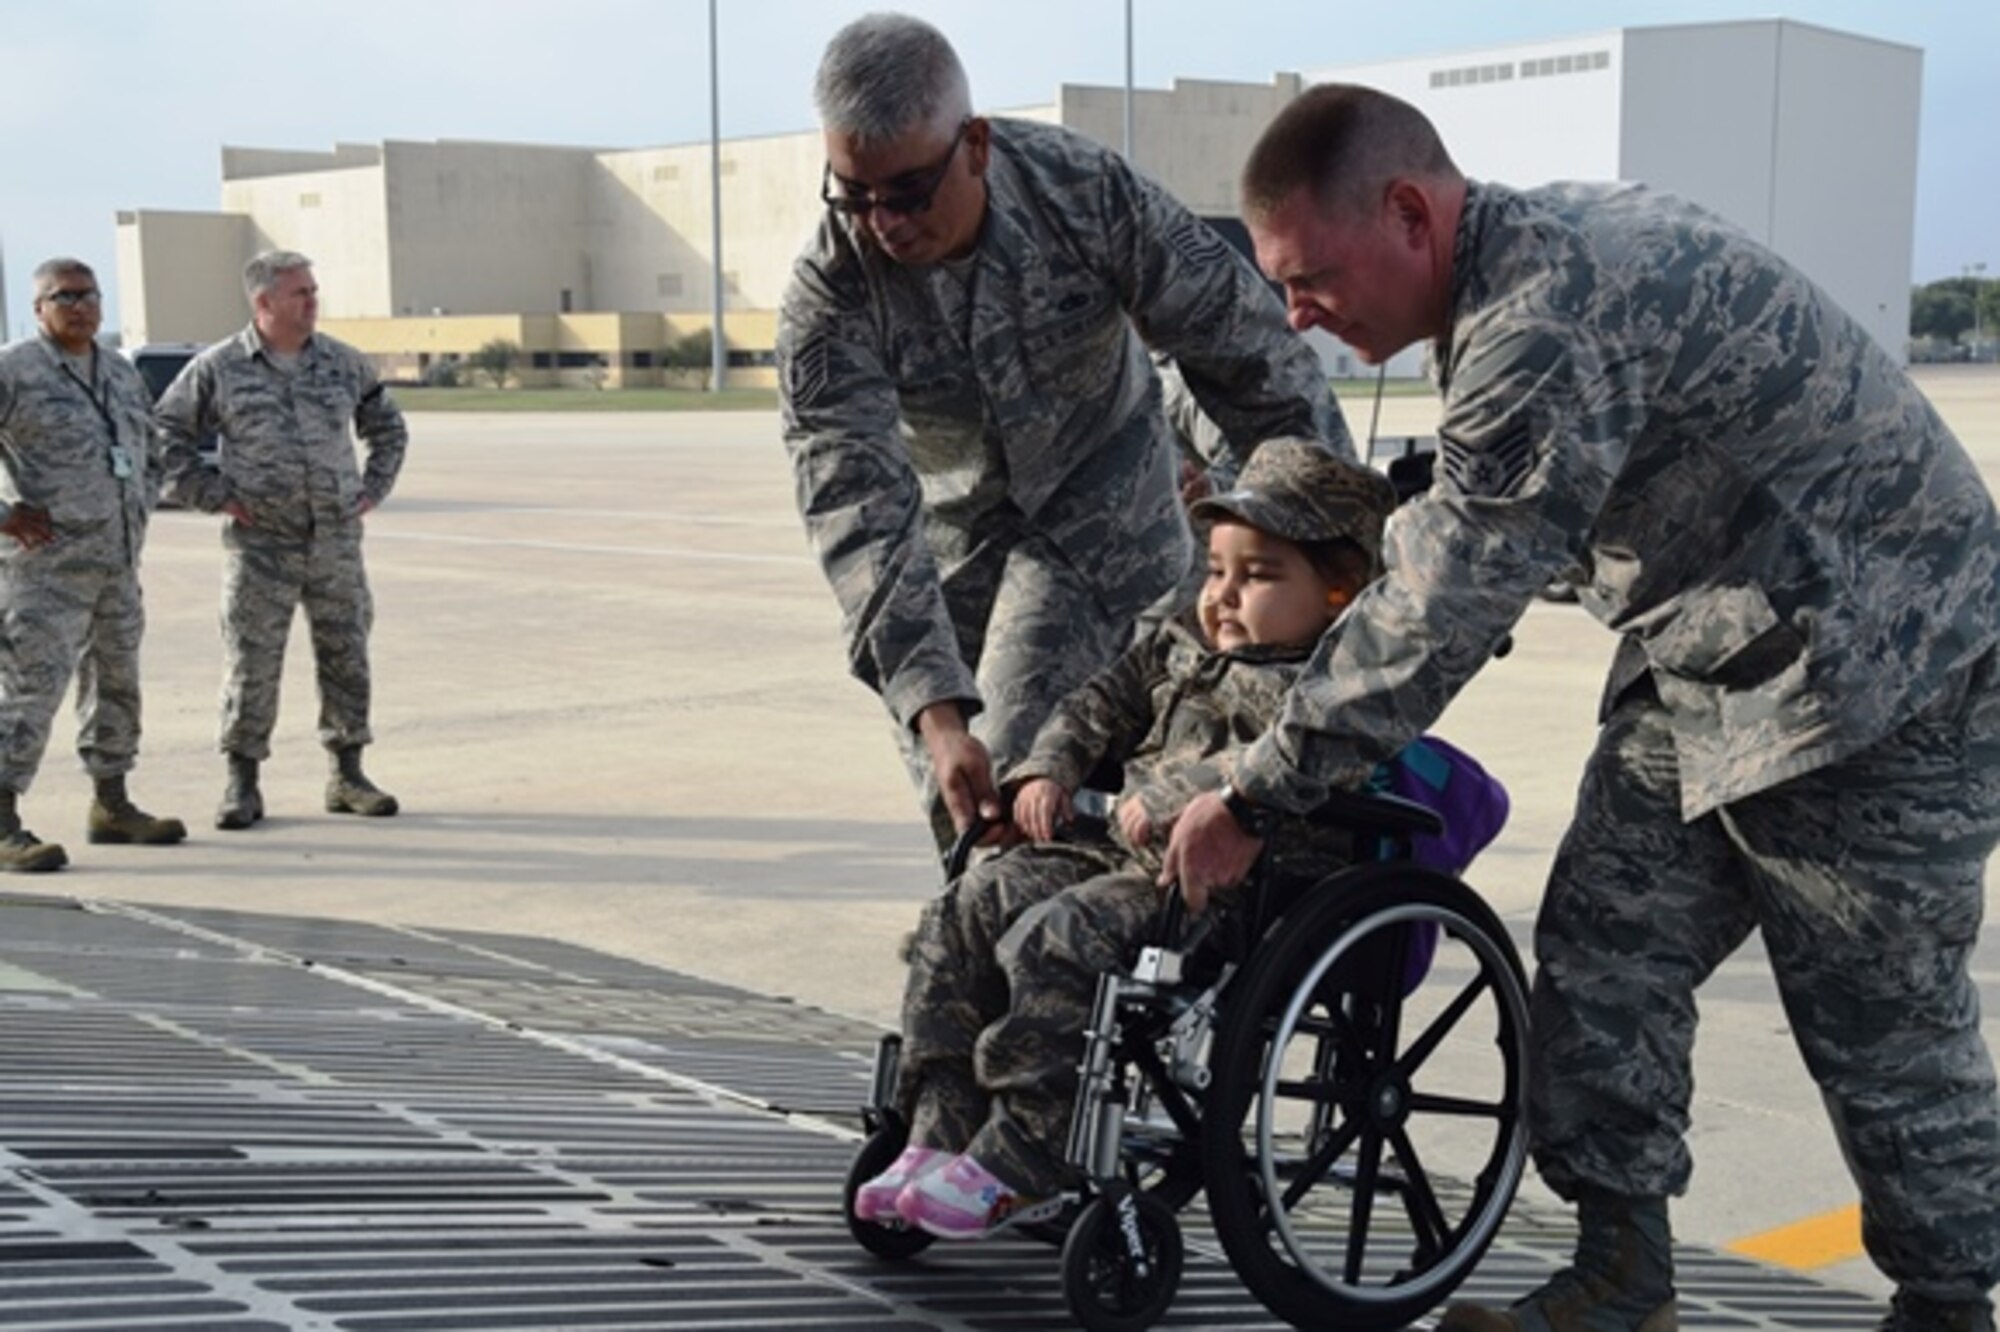 Tech. Sgt. Ernesto Compean, left, and Staff Sgt. Timothy McKay, right, Rising 6 members from the 433rd Aircraft Maintenance Squadron, help 5-year-old Mayra Salinas onto the front loading ramp of a C-5M Super Galaxy Nov. 5, 2016 at Joint Base San Antonio-Lackland, Texas. Mayra was chosen to be the Rising 6 Airman for the Day. The Rising 6 is a private organization comprised of Airmen grade E-1 through E-6. (U.S. Air Force photo/Tech. Sgt. Carlos J. Treviño)